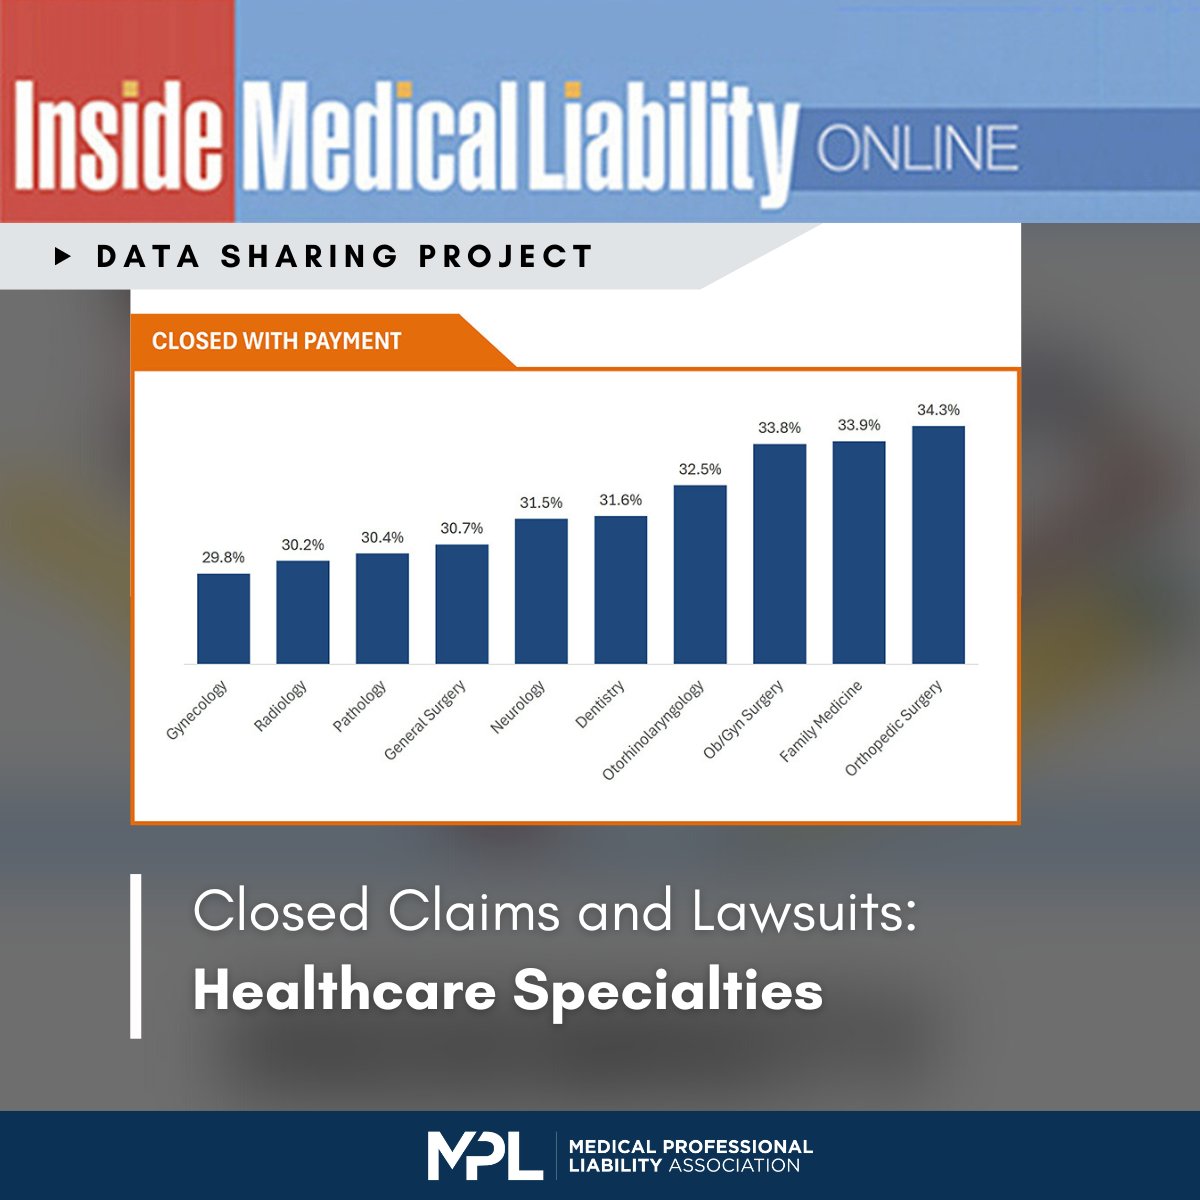 The MPL Association Data Sharing Project provides a closer look at healthcare specialties by average indemnity, percentage of claims closed with payment, and average defense costs. Learn more: bit.ly/49KJR8K